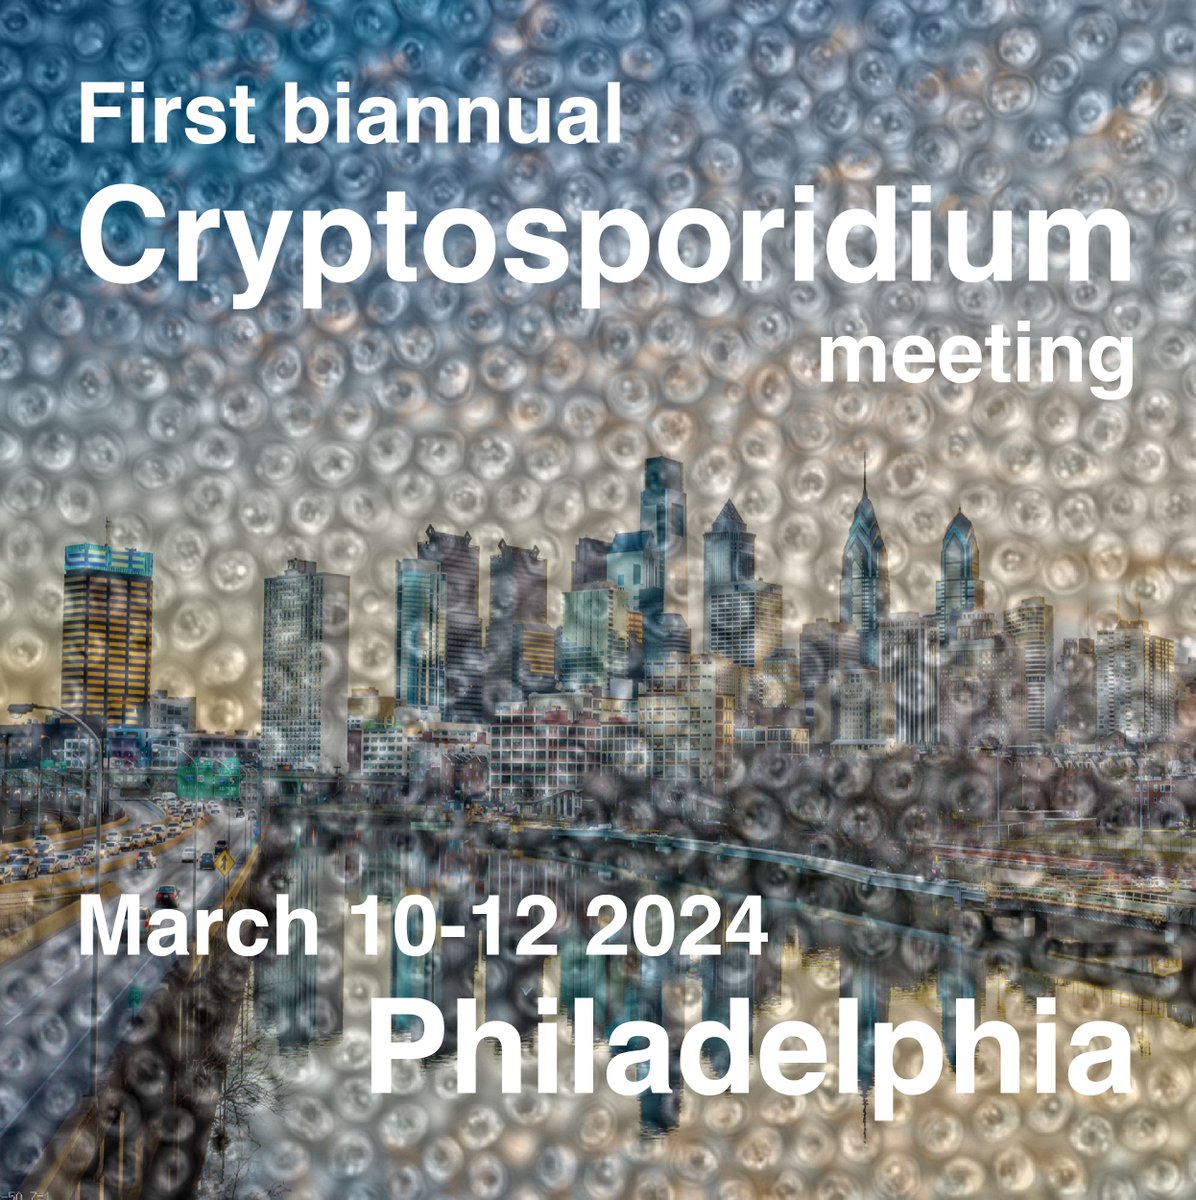 Cryptosporidium 2024 is almost here! Thanks to all of your submissions there is an exciting program to check out at file:///Users/striepen/Downloads/Crypto_2024_program.pdf @BSPparasitology @parasitesrule @AmSocParasit @TrendsParasitol @ParaFrap @AS_Para @pennvet @KingOfPathogens